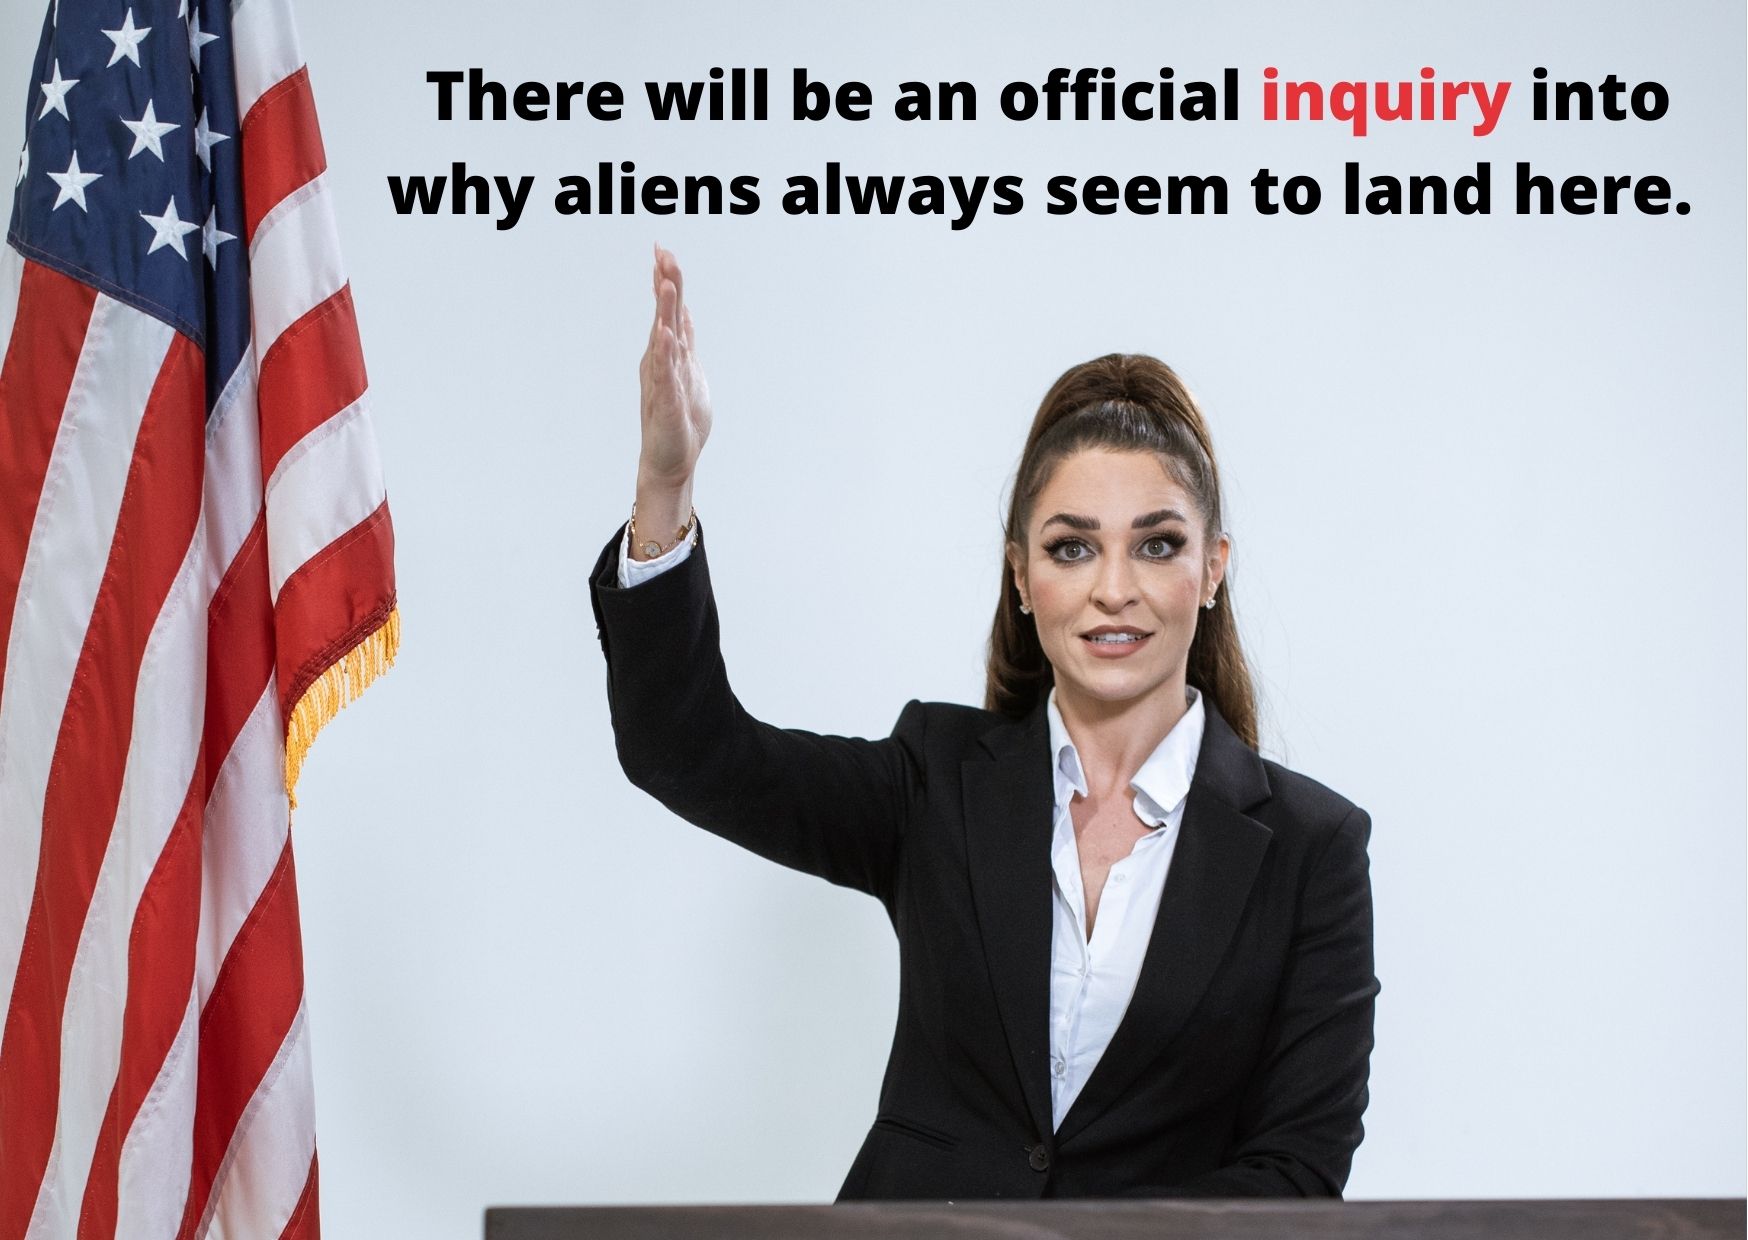 Woman next to an American flag with the words "There will be an official inquiry as to why aliens always seem to land here"